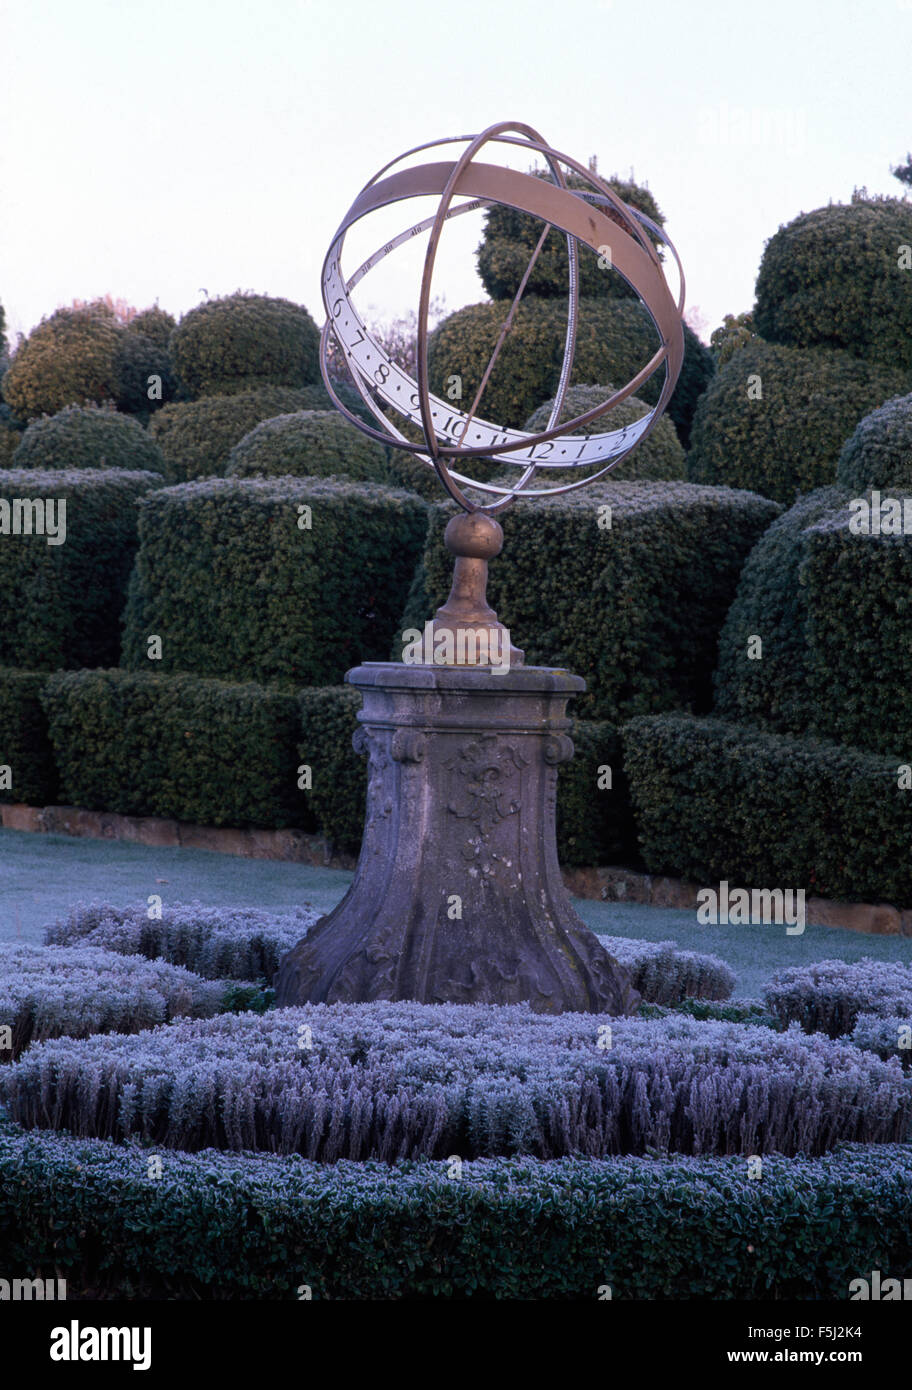 Armillary sphere on stone plinth in frosted knot garden with topiary Stock Photo